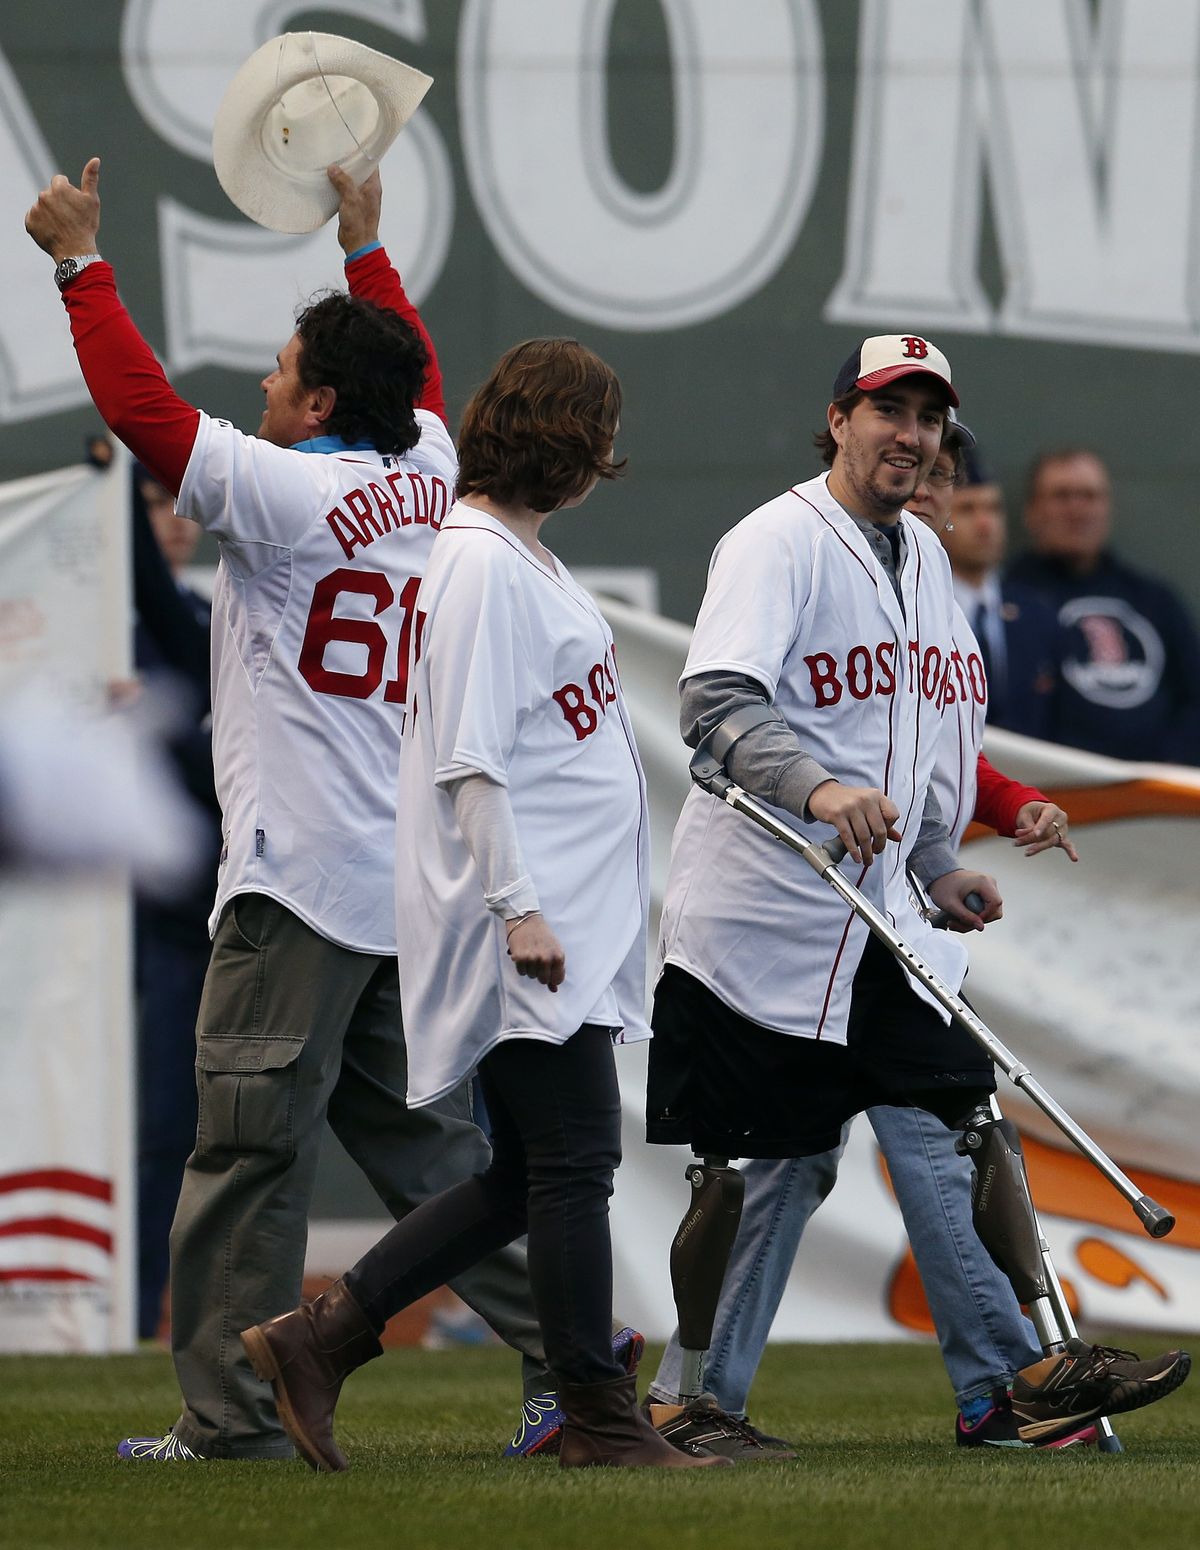 Bombing survivors, including Jeff Bauman, right, and Carlos Arredondo, were honored at Fenway Park on Sunday. (Associated Press)